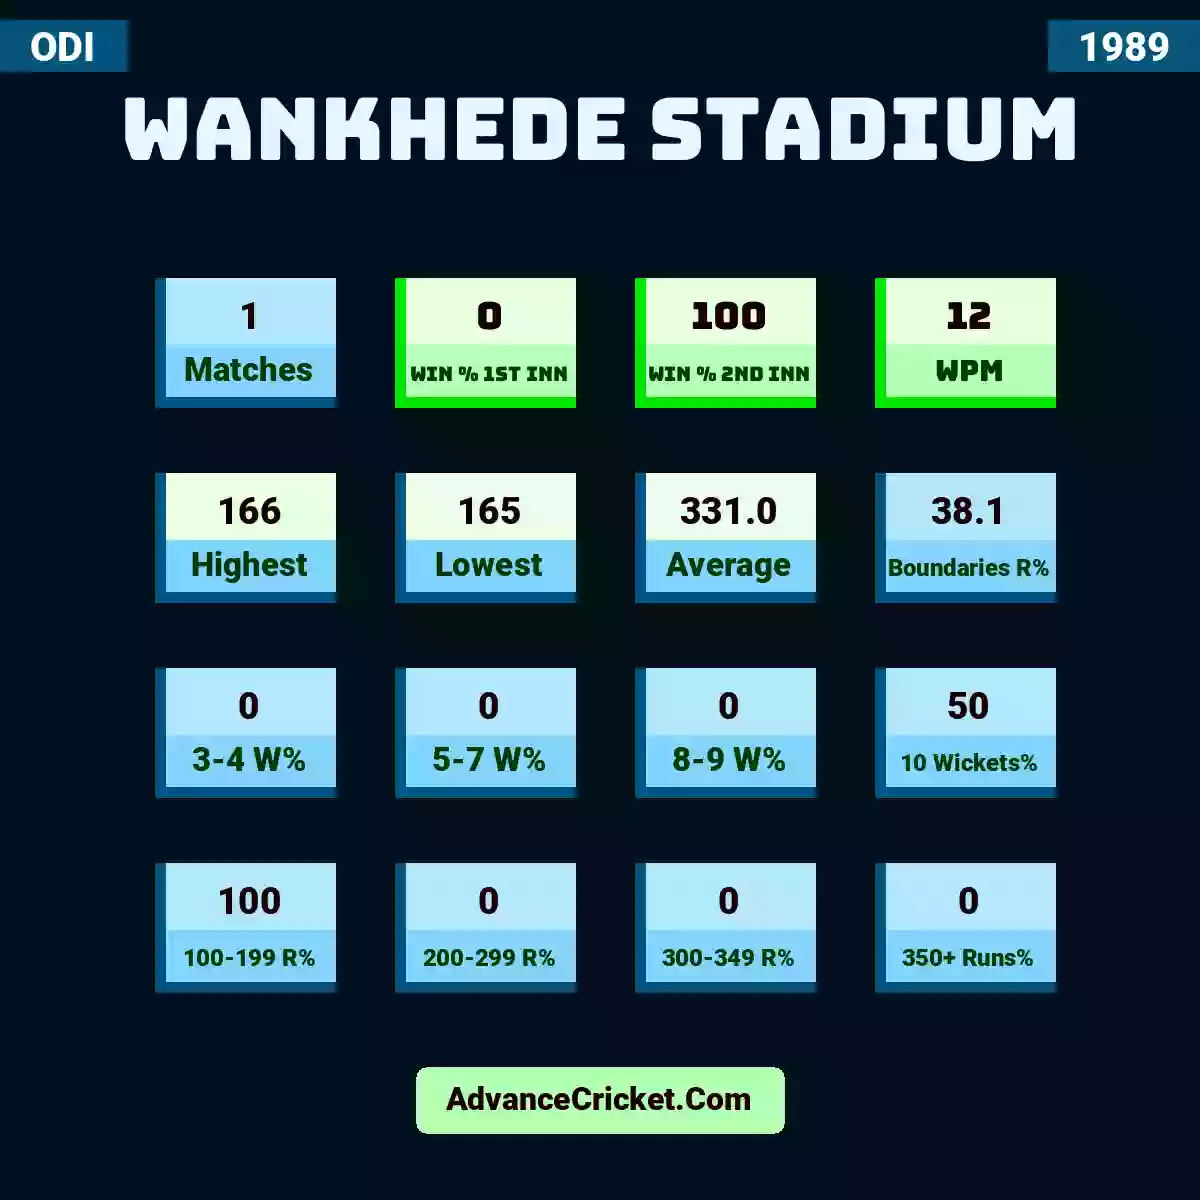 Image showing Wankhede Stadium with Matches: 1, Win % 1st Inn: 0, Win % 2nd Inn: 100, WPM: 12, Highest: 166, Lowest: 165, Average: 331.0, Boundaries R%: 38.1, 3-4 W%: 0, 5-7 W%: 0, 8-9 W%: 0, 10 Wickets%: 50, 100-199 R%: 100, 200-299 R%: 0, 300-349 R%: 0, 350+ Runs%: 0.